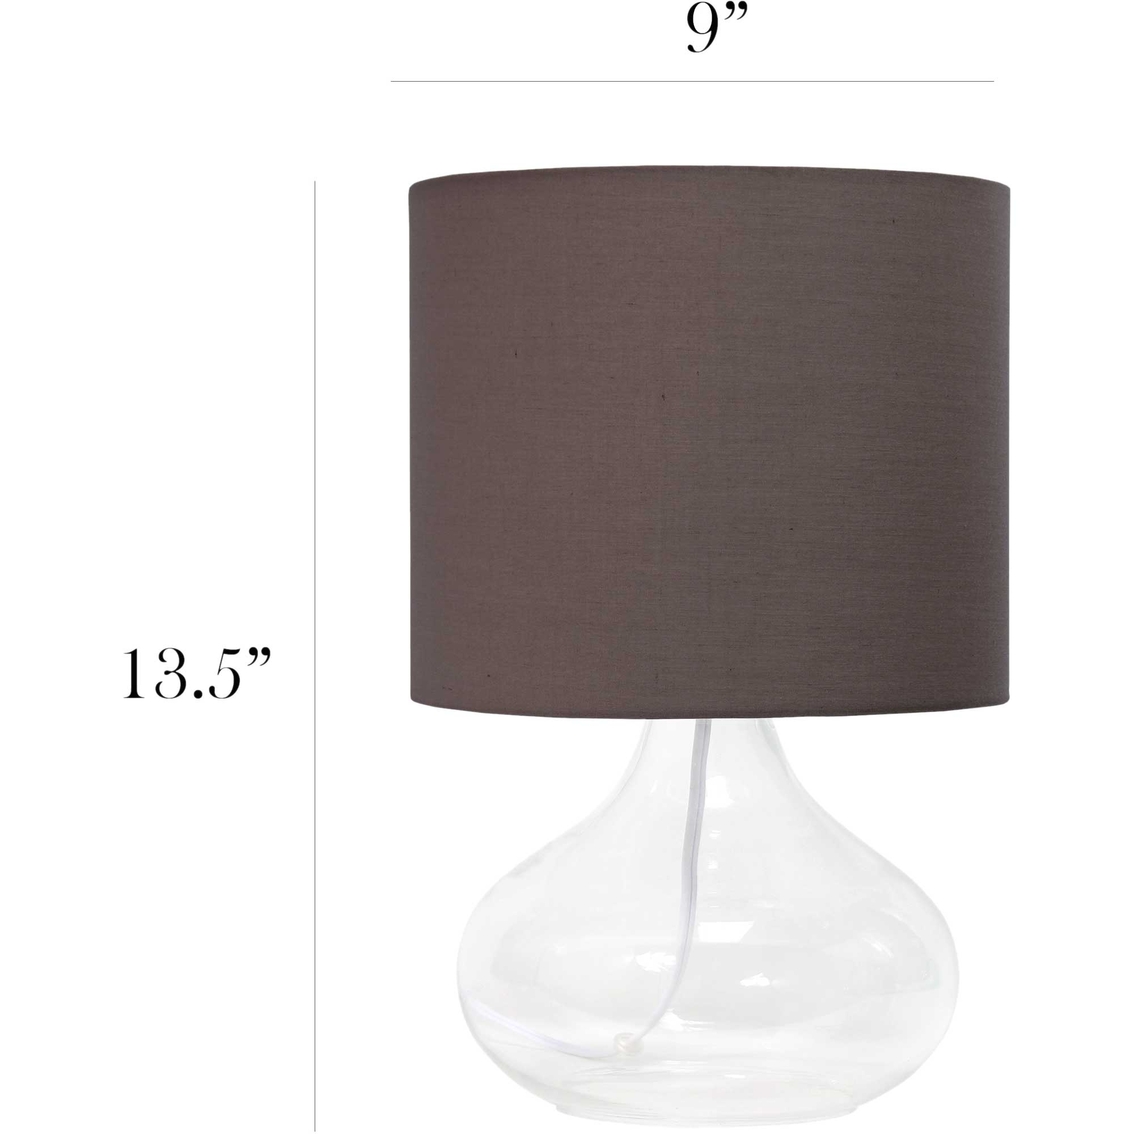 Simple Designs Glass Raindrop 13.5 in. Table Lamp - Image 9 of 9